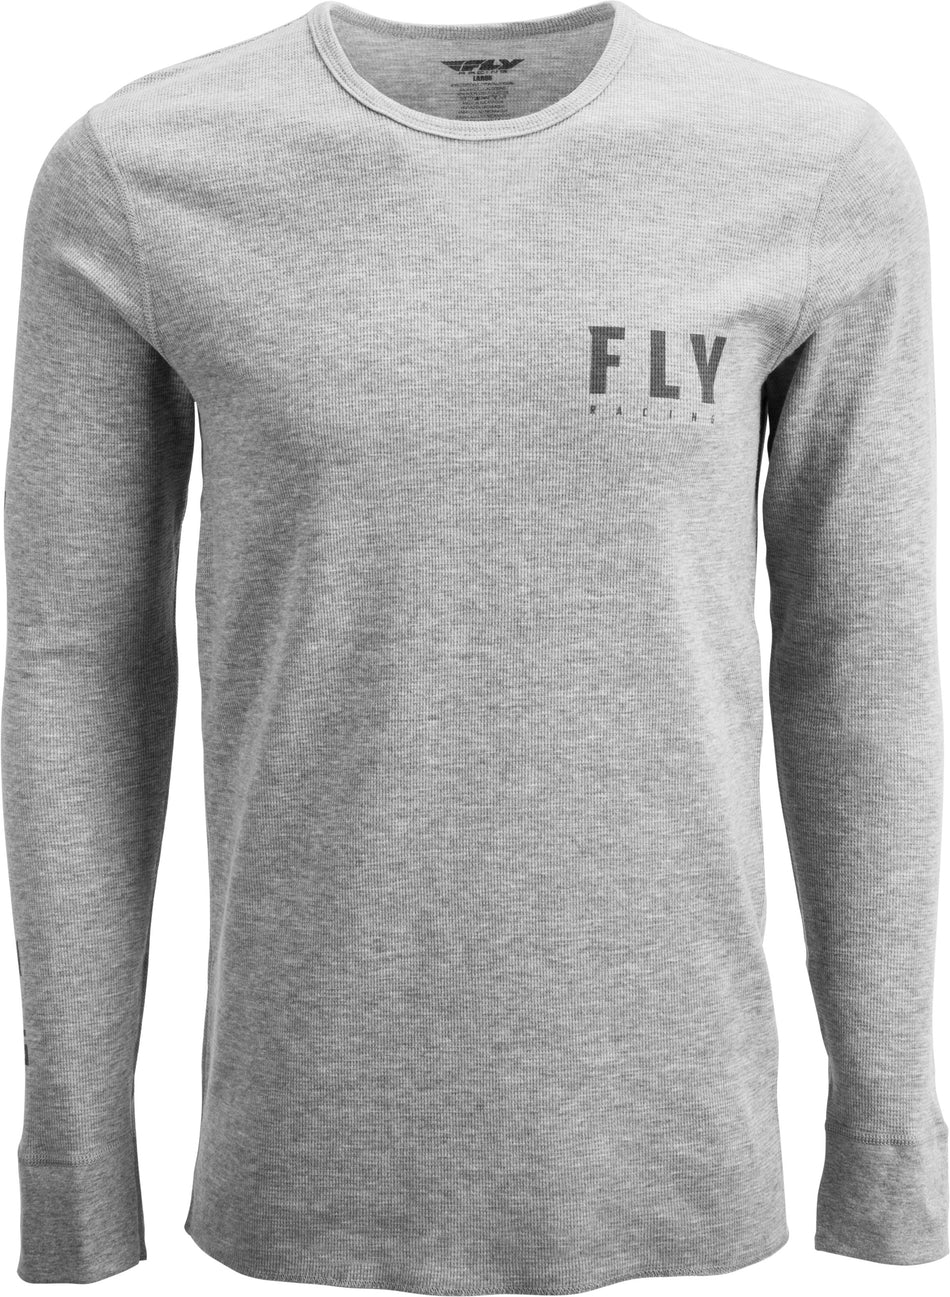 FLY RACING Fly Thermal Shirt Granite/Black Md 352-4157M